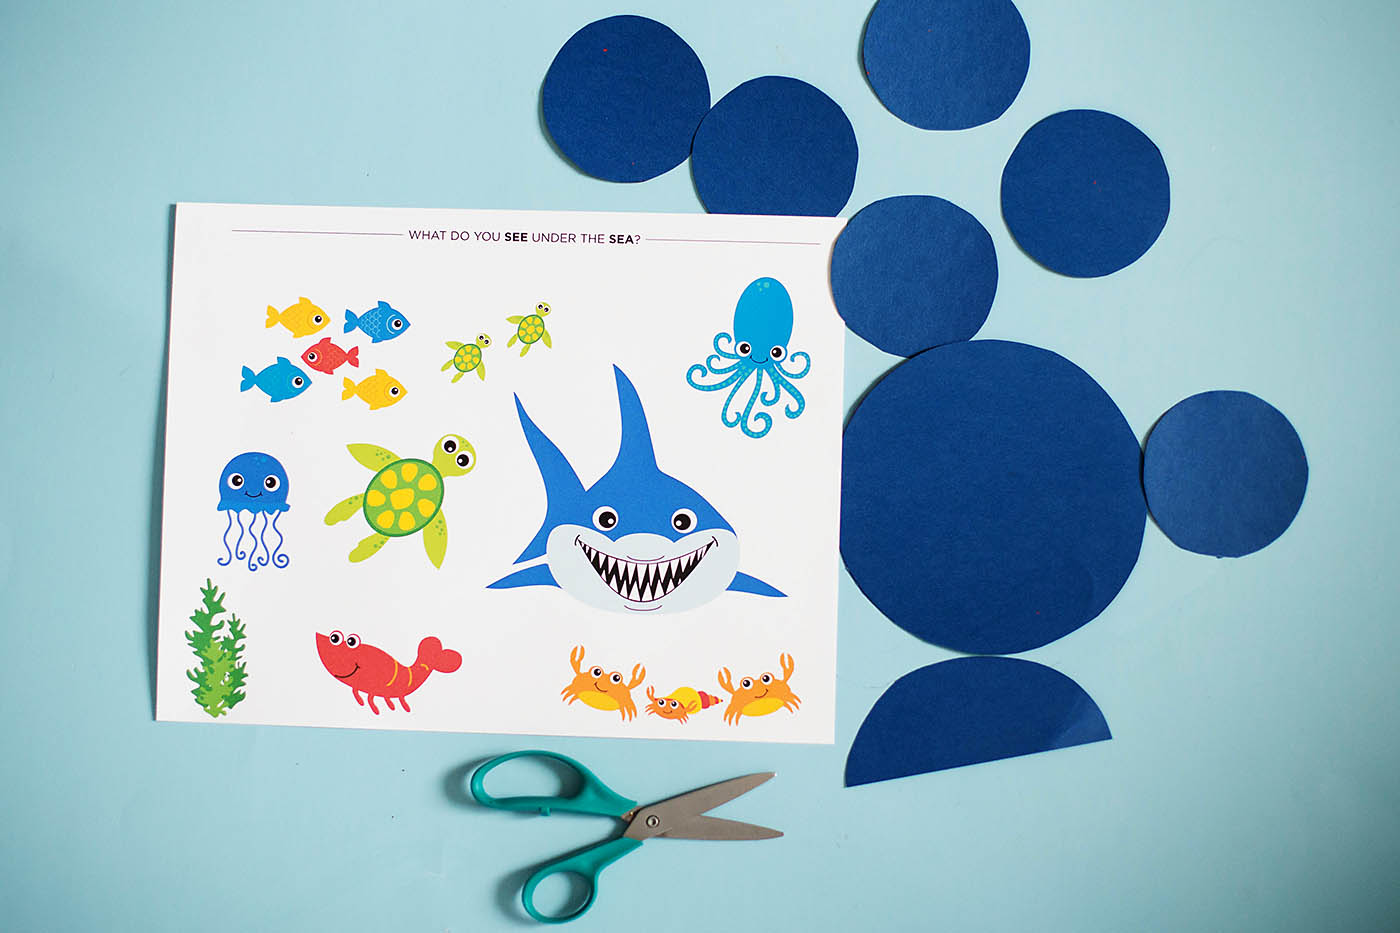 An ocean themed cutting craft perfect for kids learning to use scissors a 4 year-old milestone!